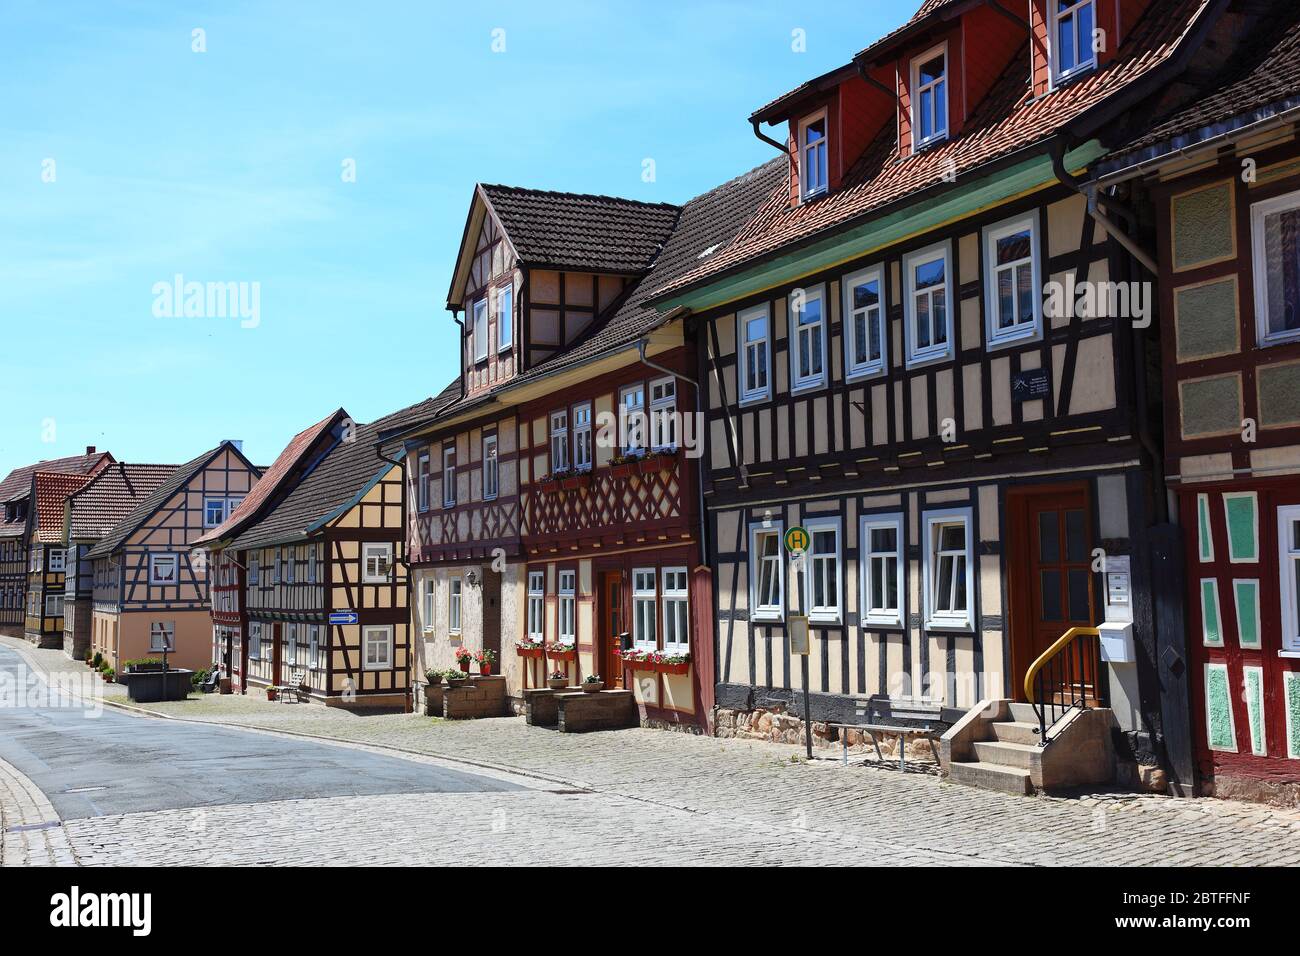 Second smallest city in Germany, Ummerstadt in the district of Hildburghausen, road train in the old town, half-timbered houses, Thuringia, Germany  / Stock Photo